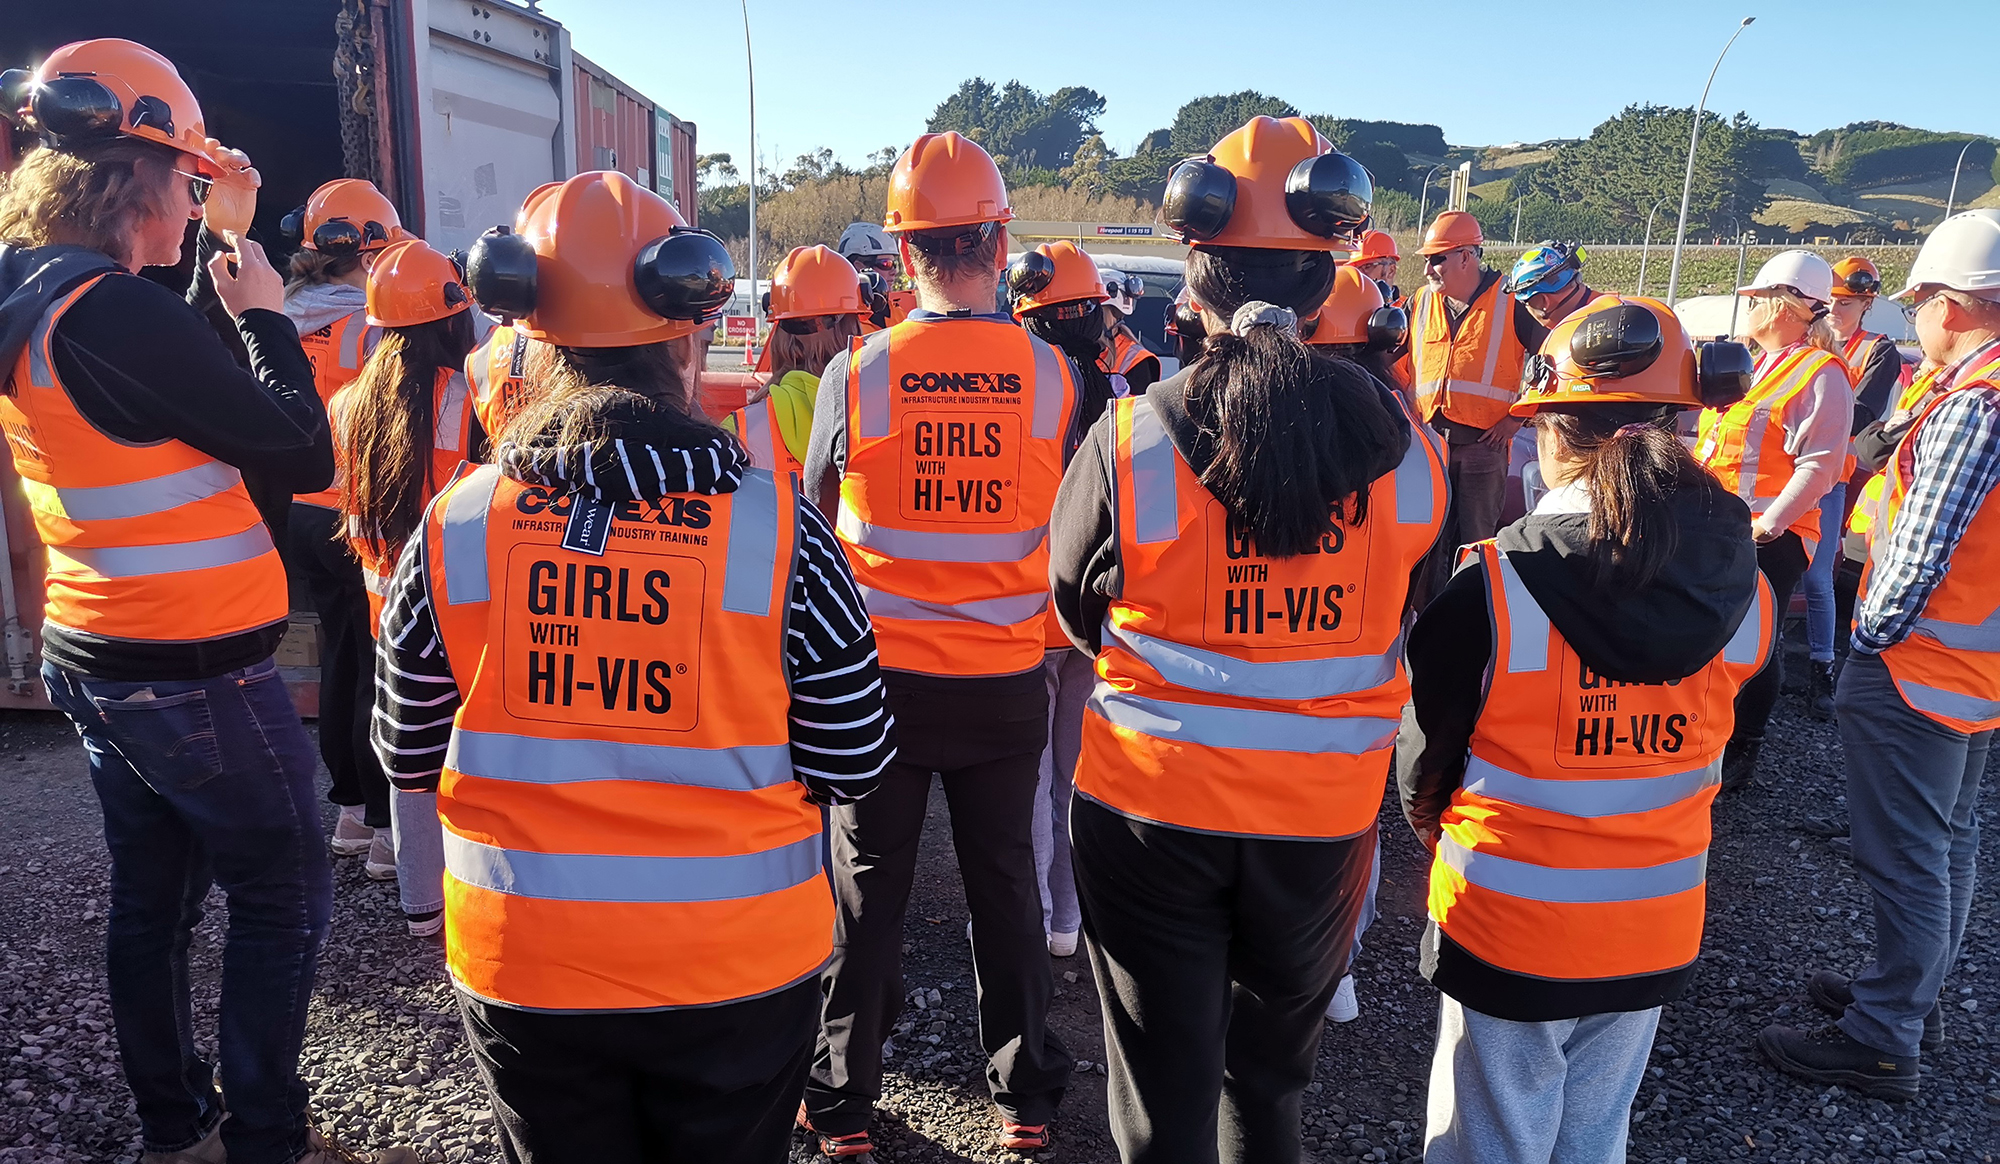 Girls wearing Hi Vis jackets, helmets and earmuffs standing with their backs to the camera.